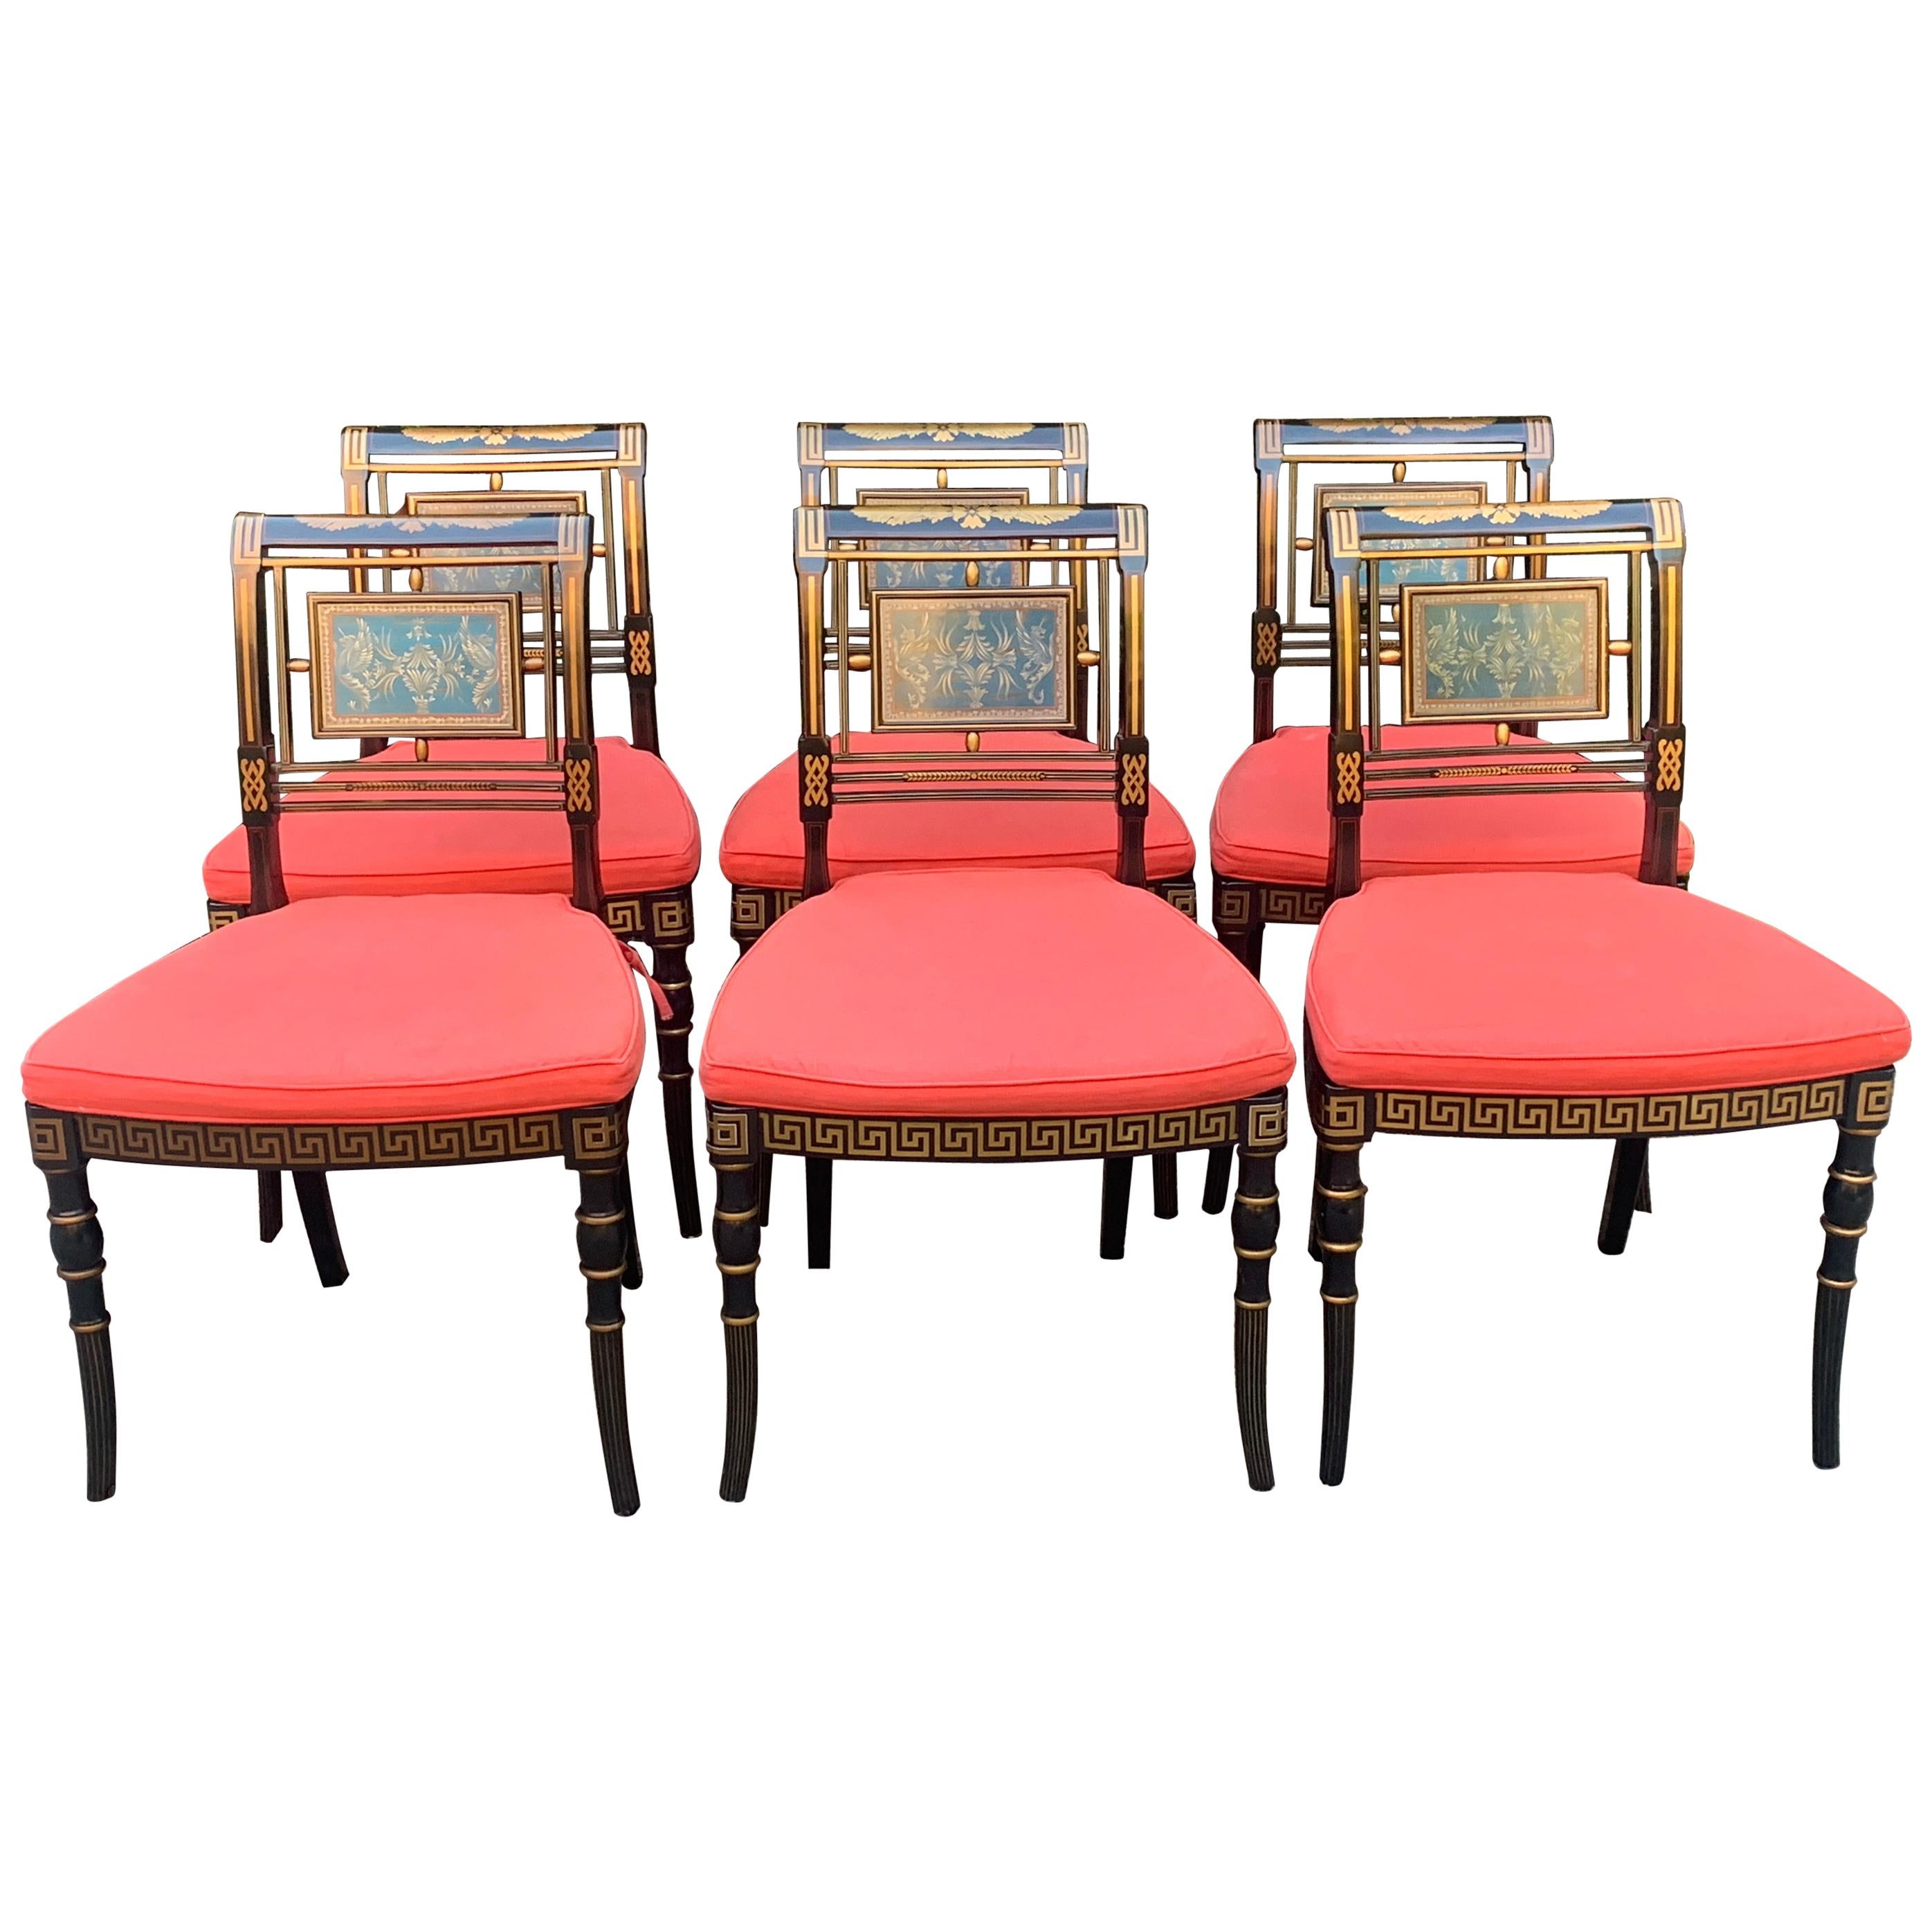 A set of six exquisite Hollywood Regency dining chairs with cushions. The chairs are hand painted, black lacquered, with cane seats and custom cushions in orange. Perfectly emulating the Hollywood Regency style. The added cushions come with ties and